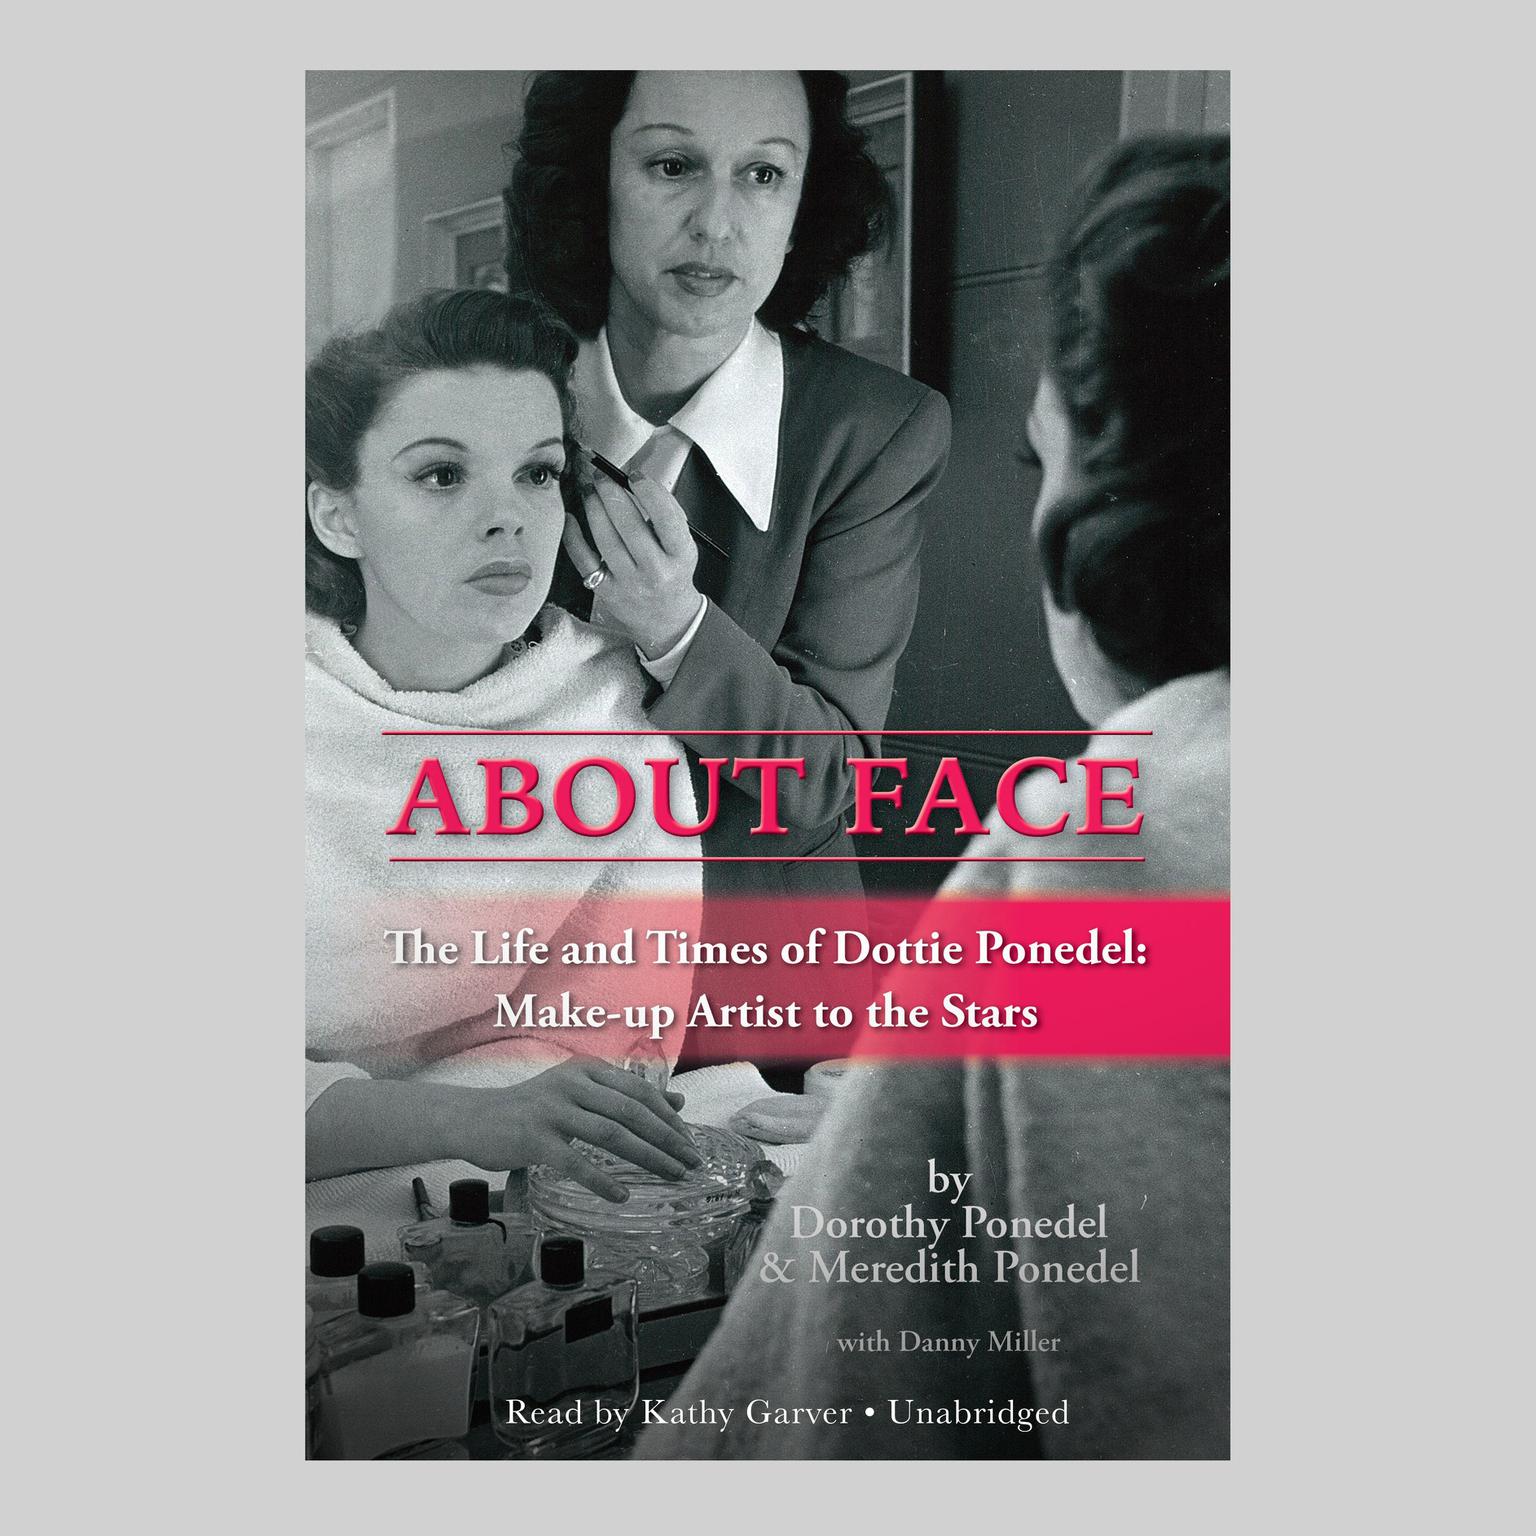 About Face: The Life and Times of Dottie Ponedel: Make-up Artist to the Stars Audiobook, by Dorothy Ponedel